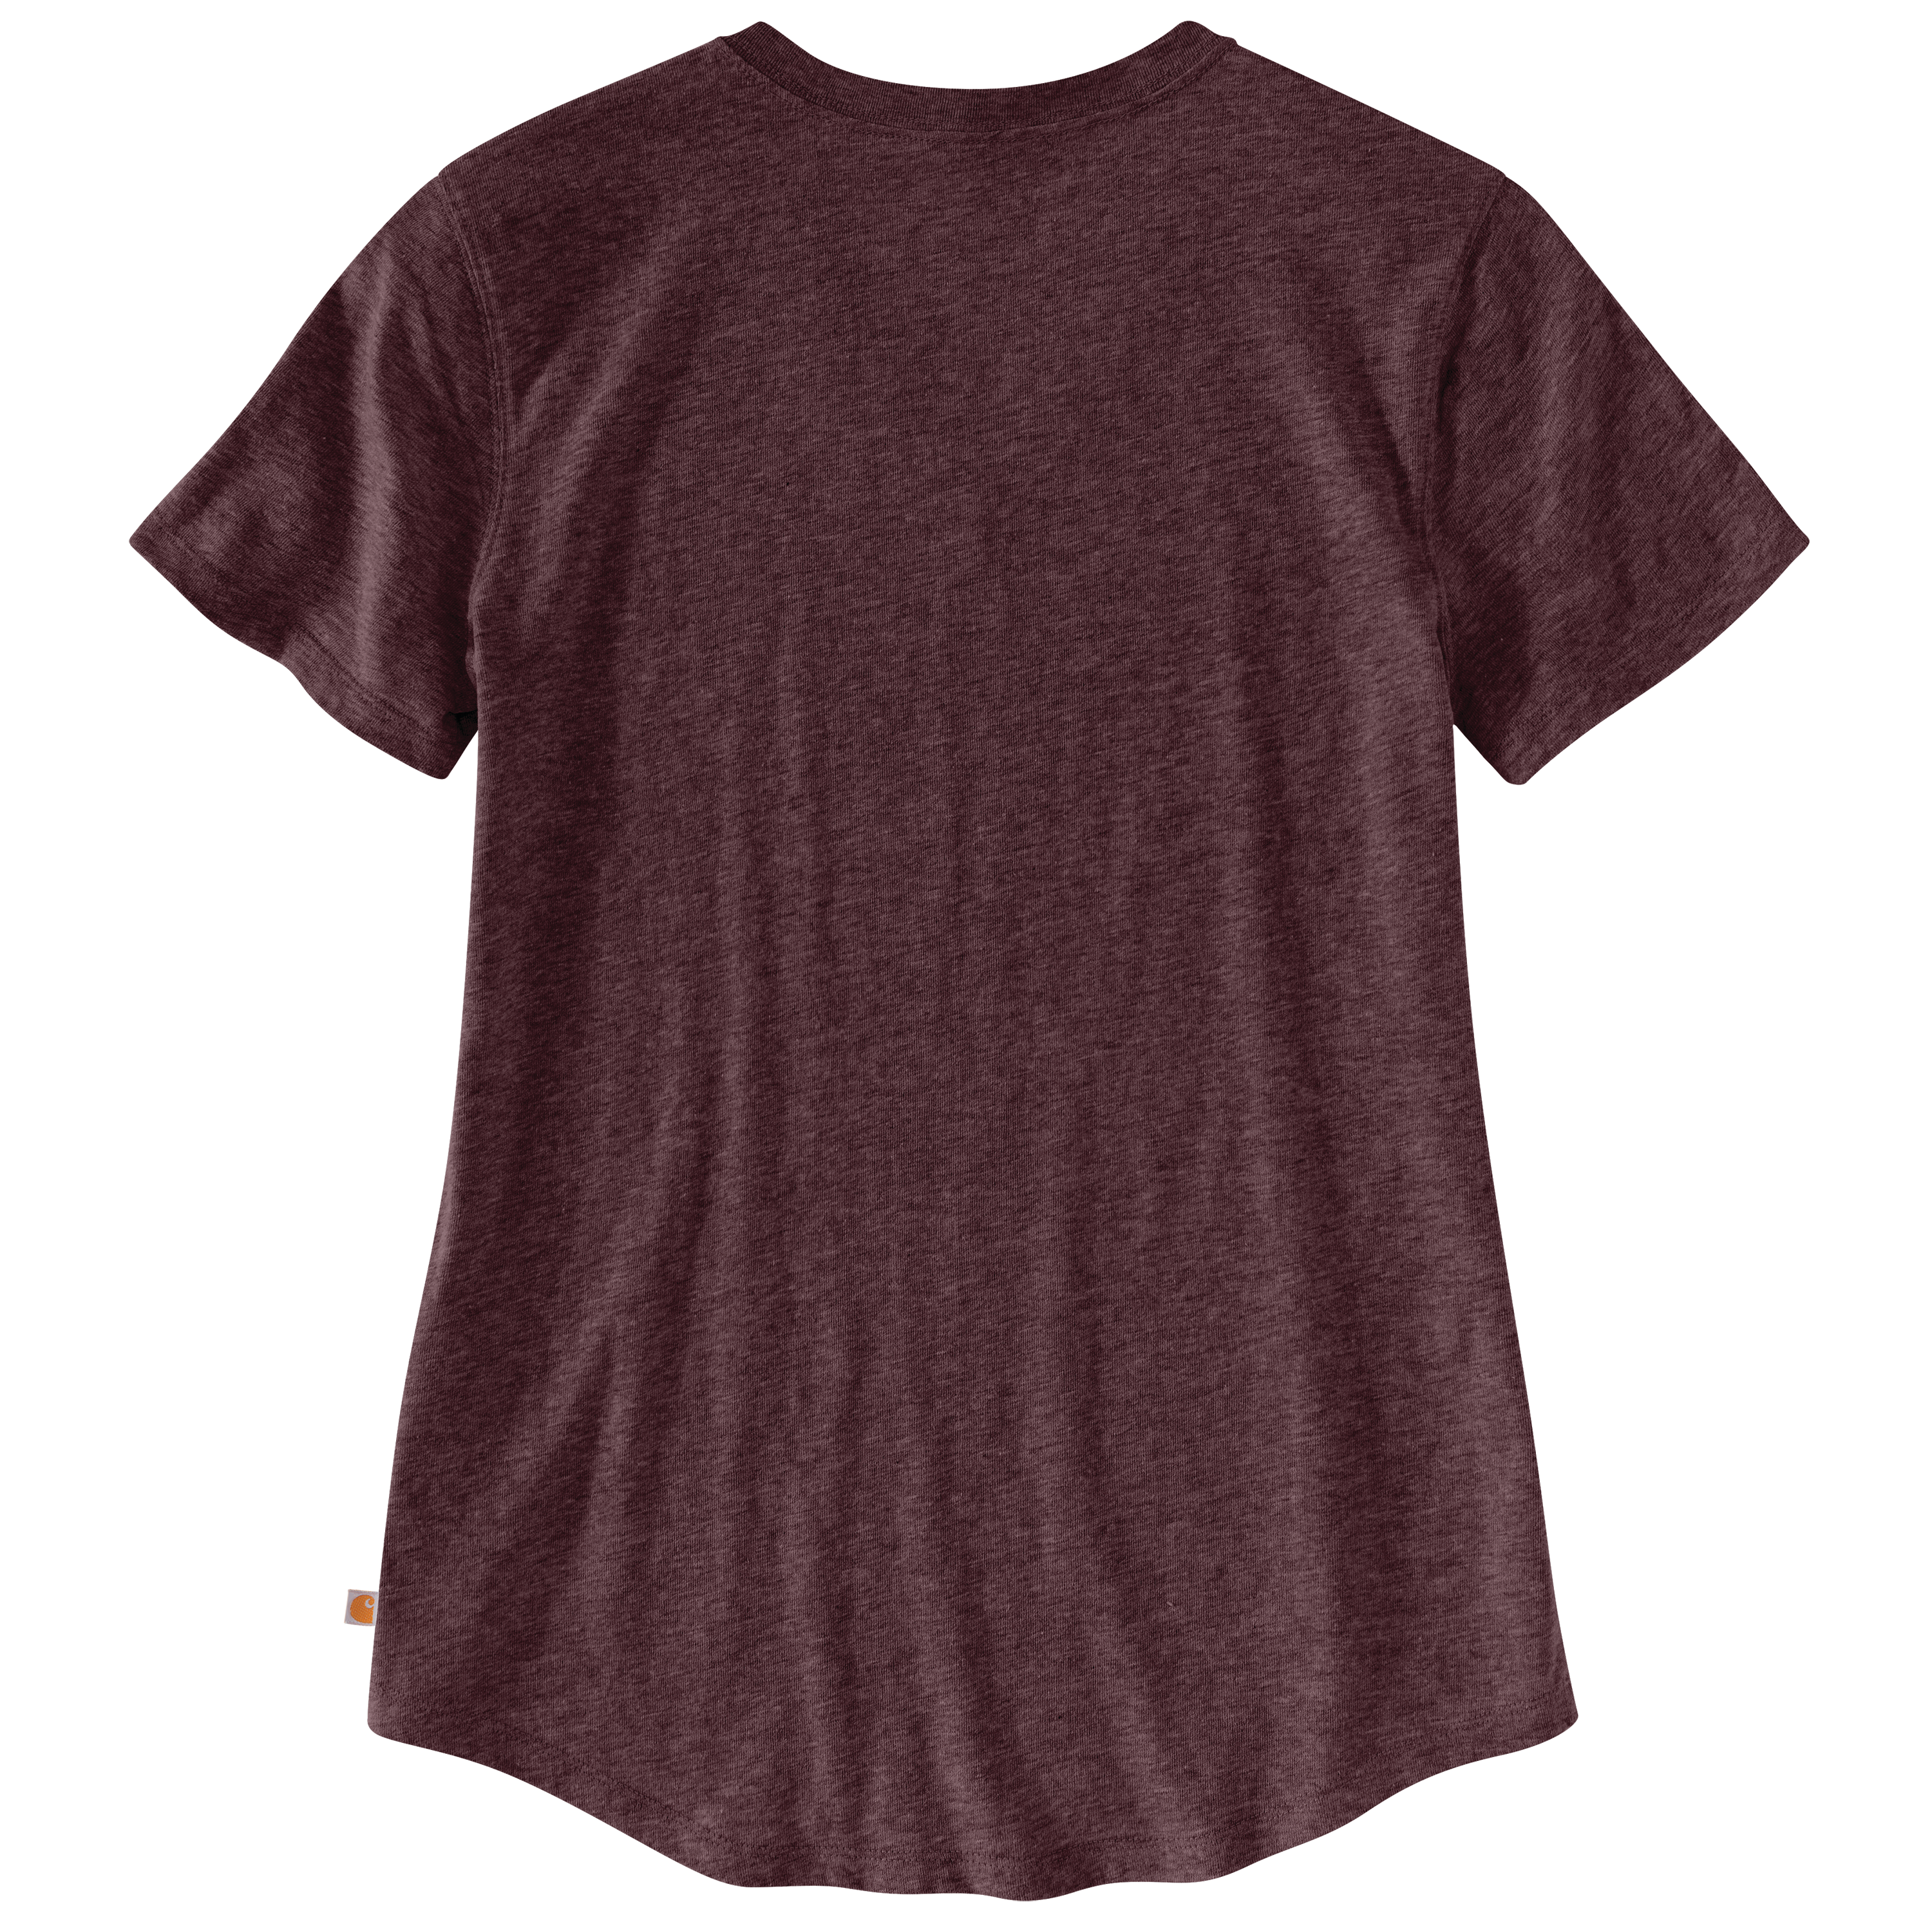 Carhartt Women's Relaxed-Fit Midweight V-Neck Tee